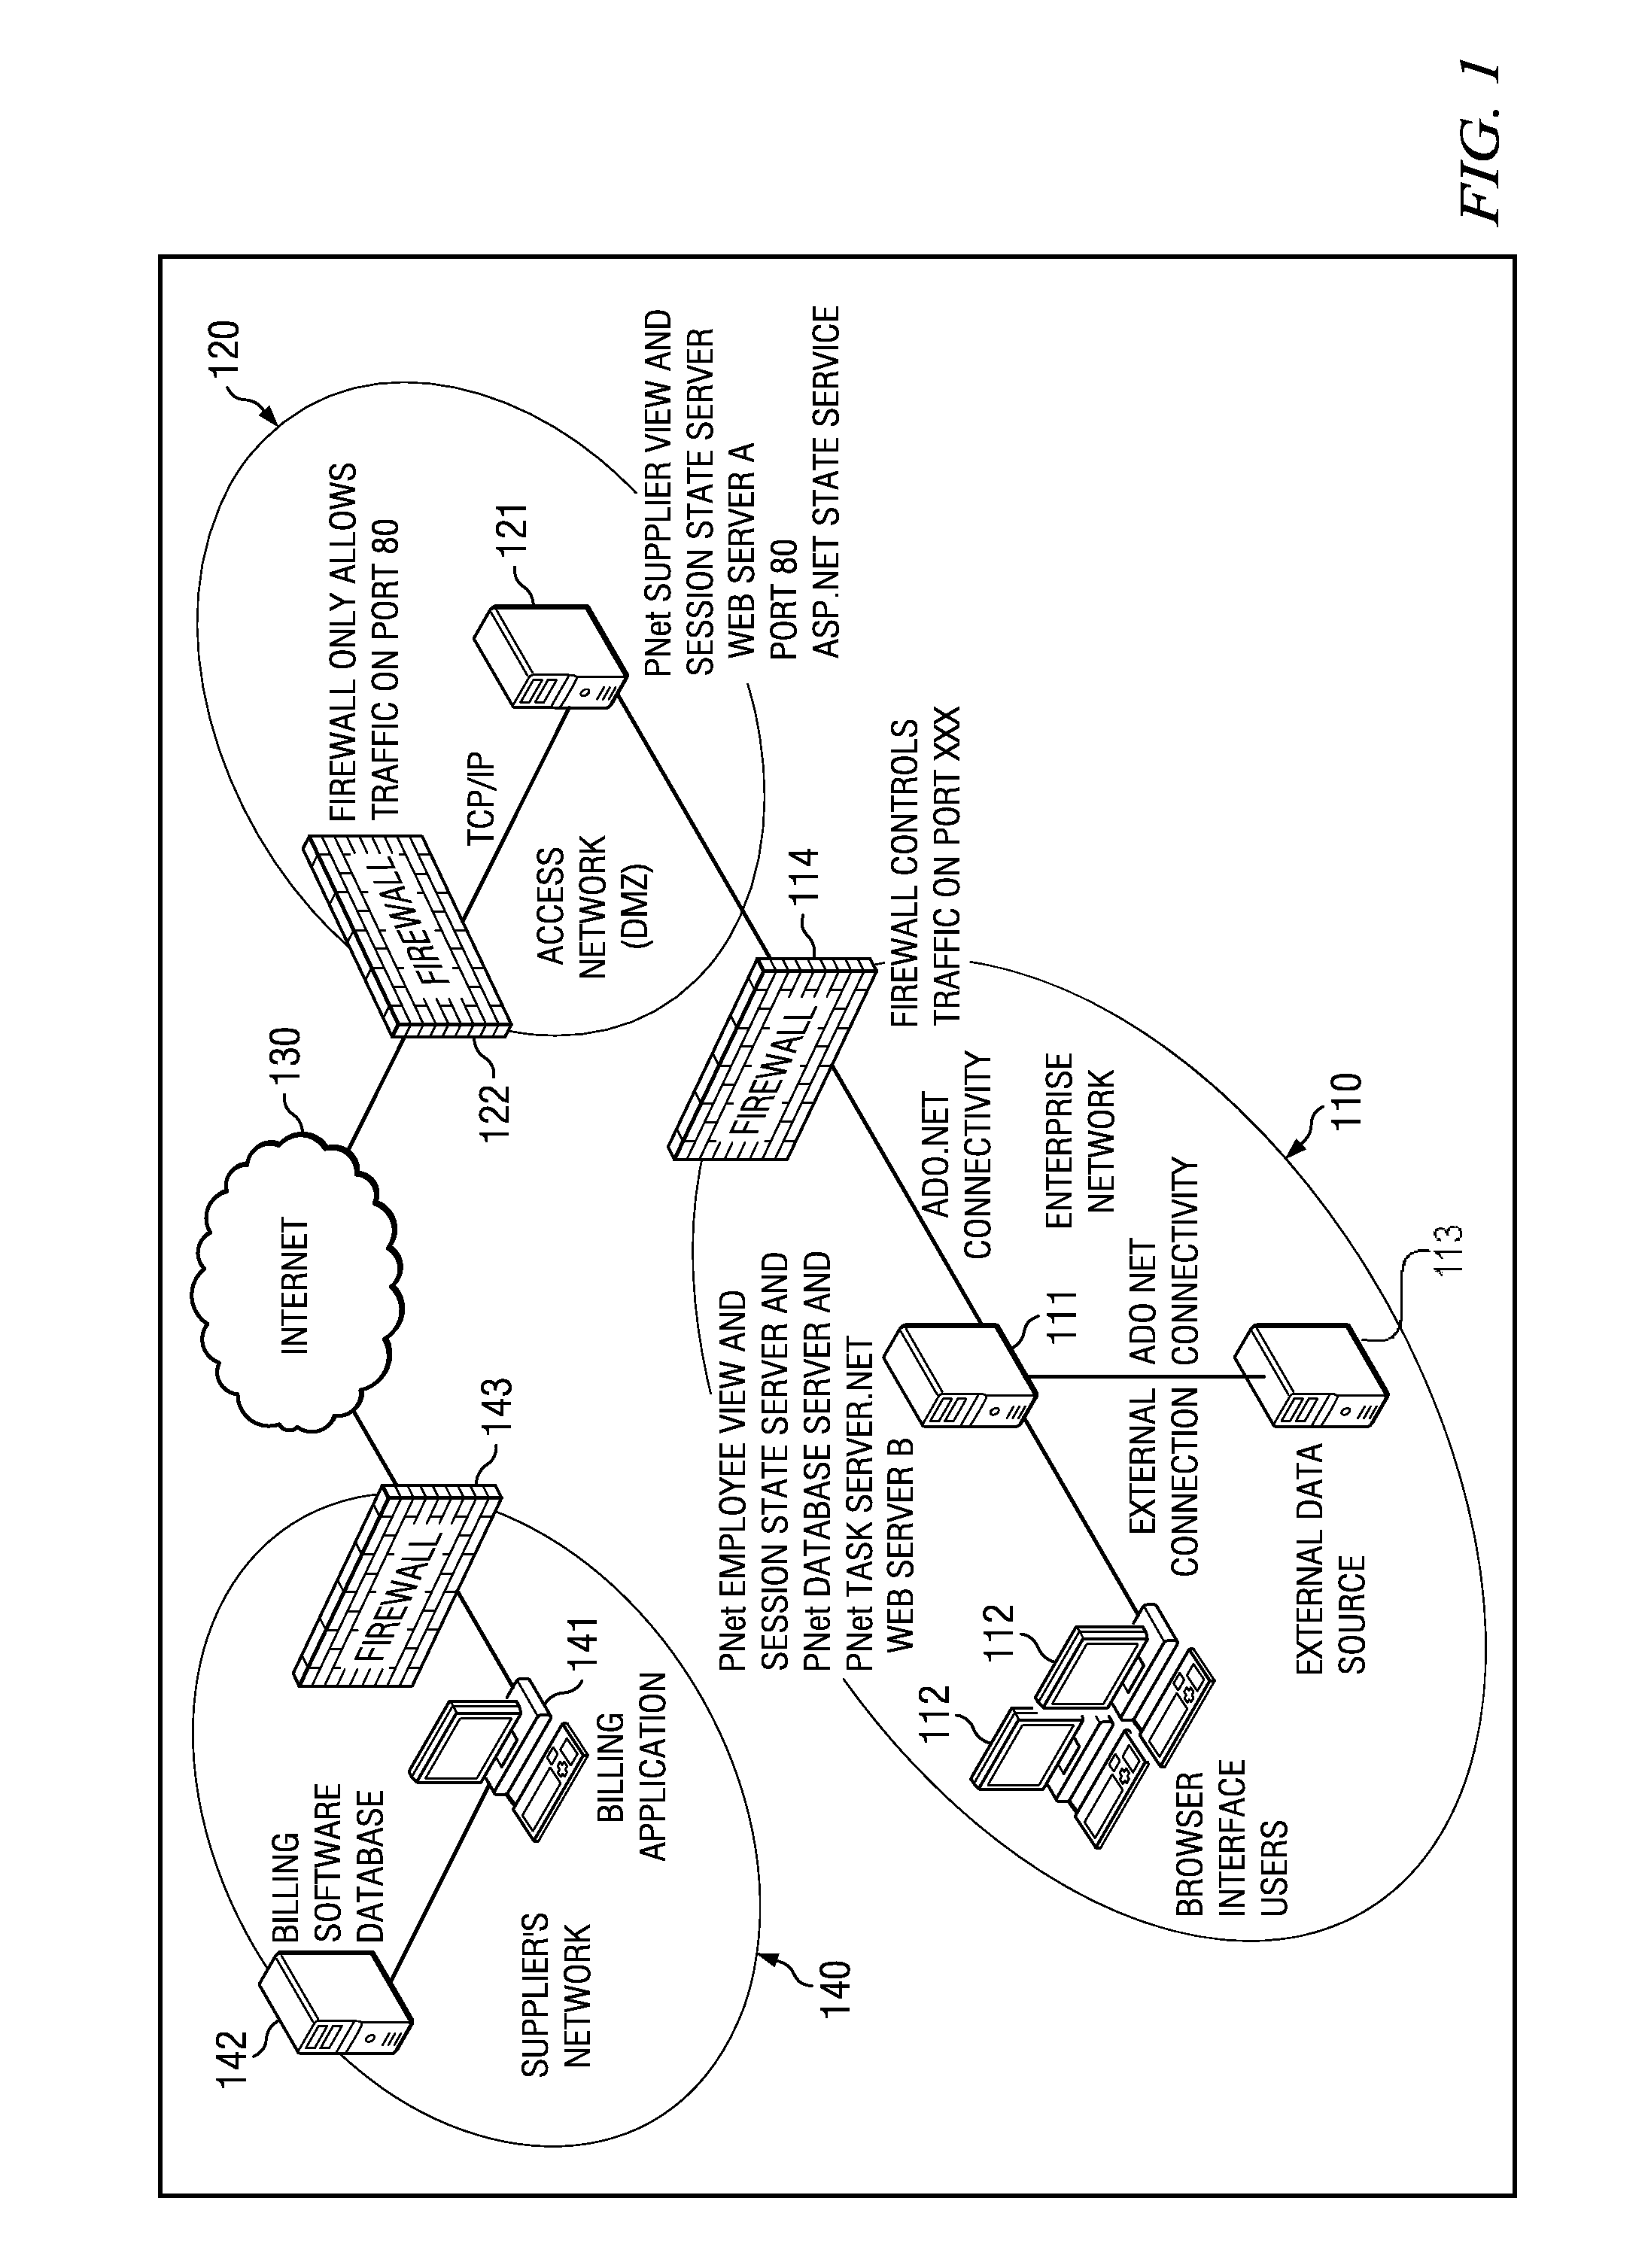 Electronic processing of invoices using assigned users and supplier groups